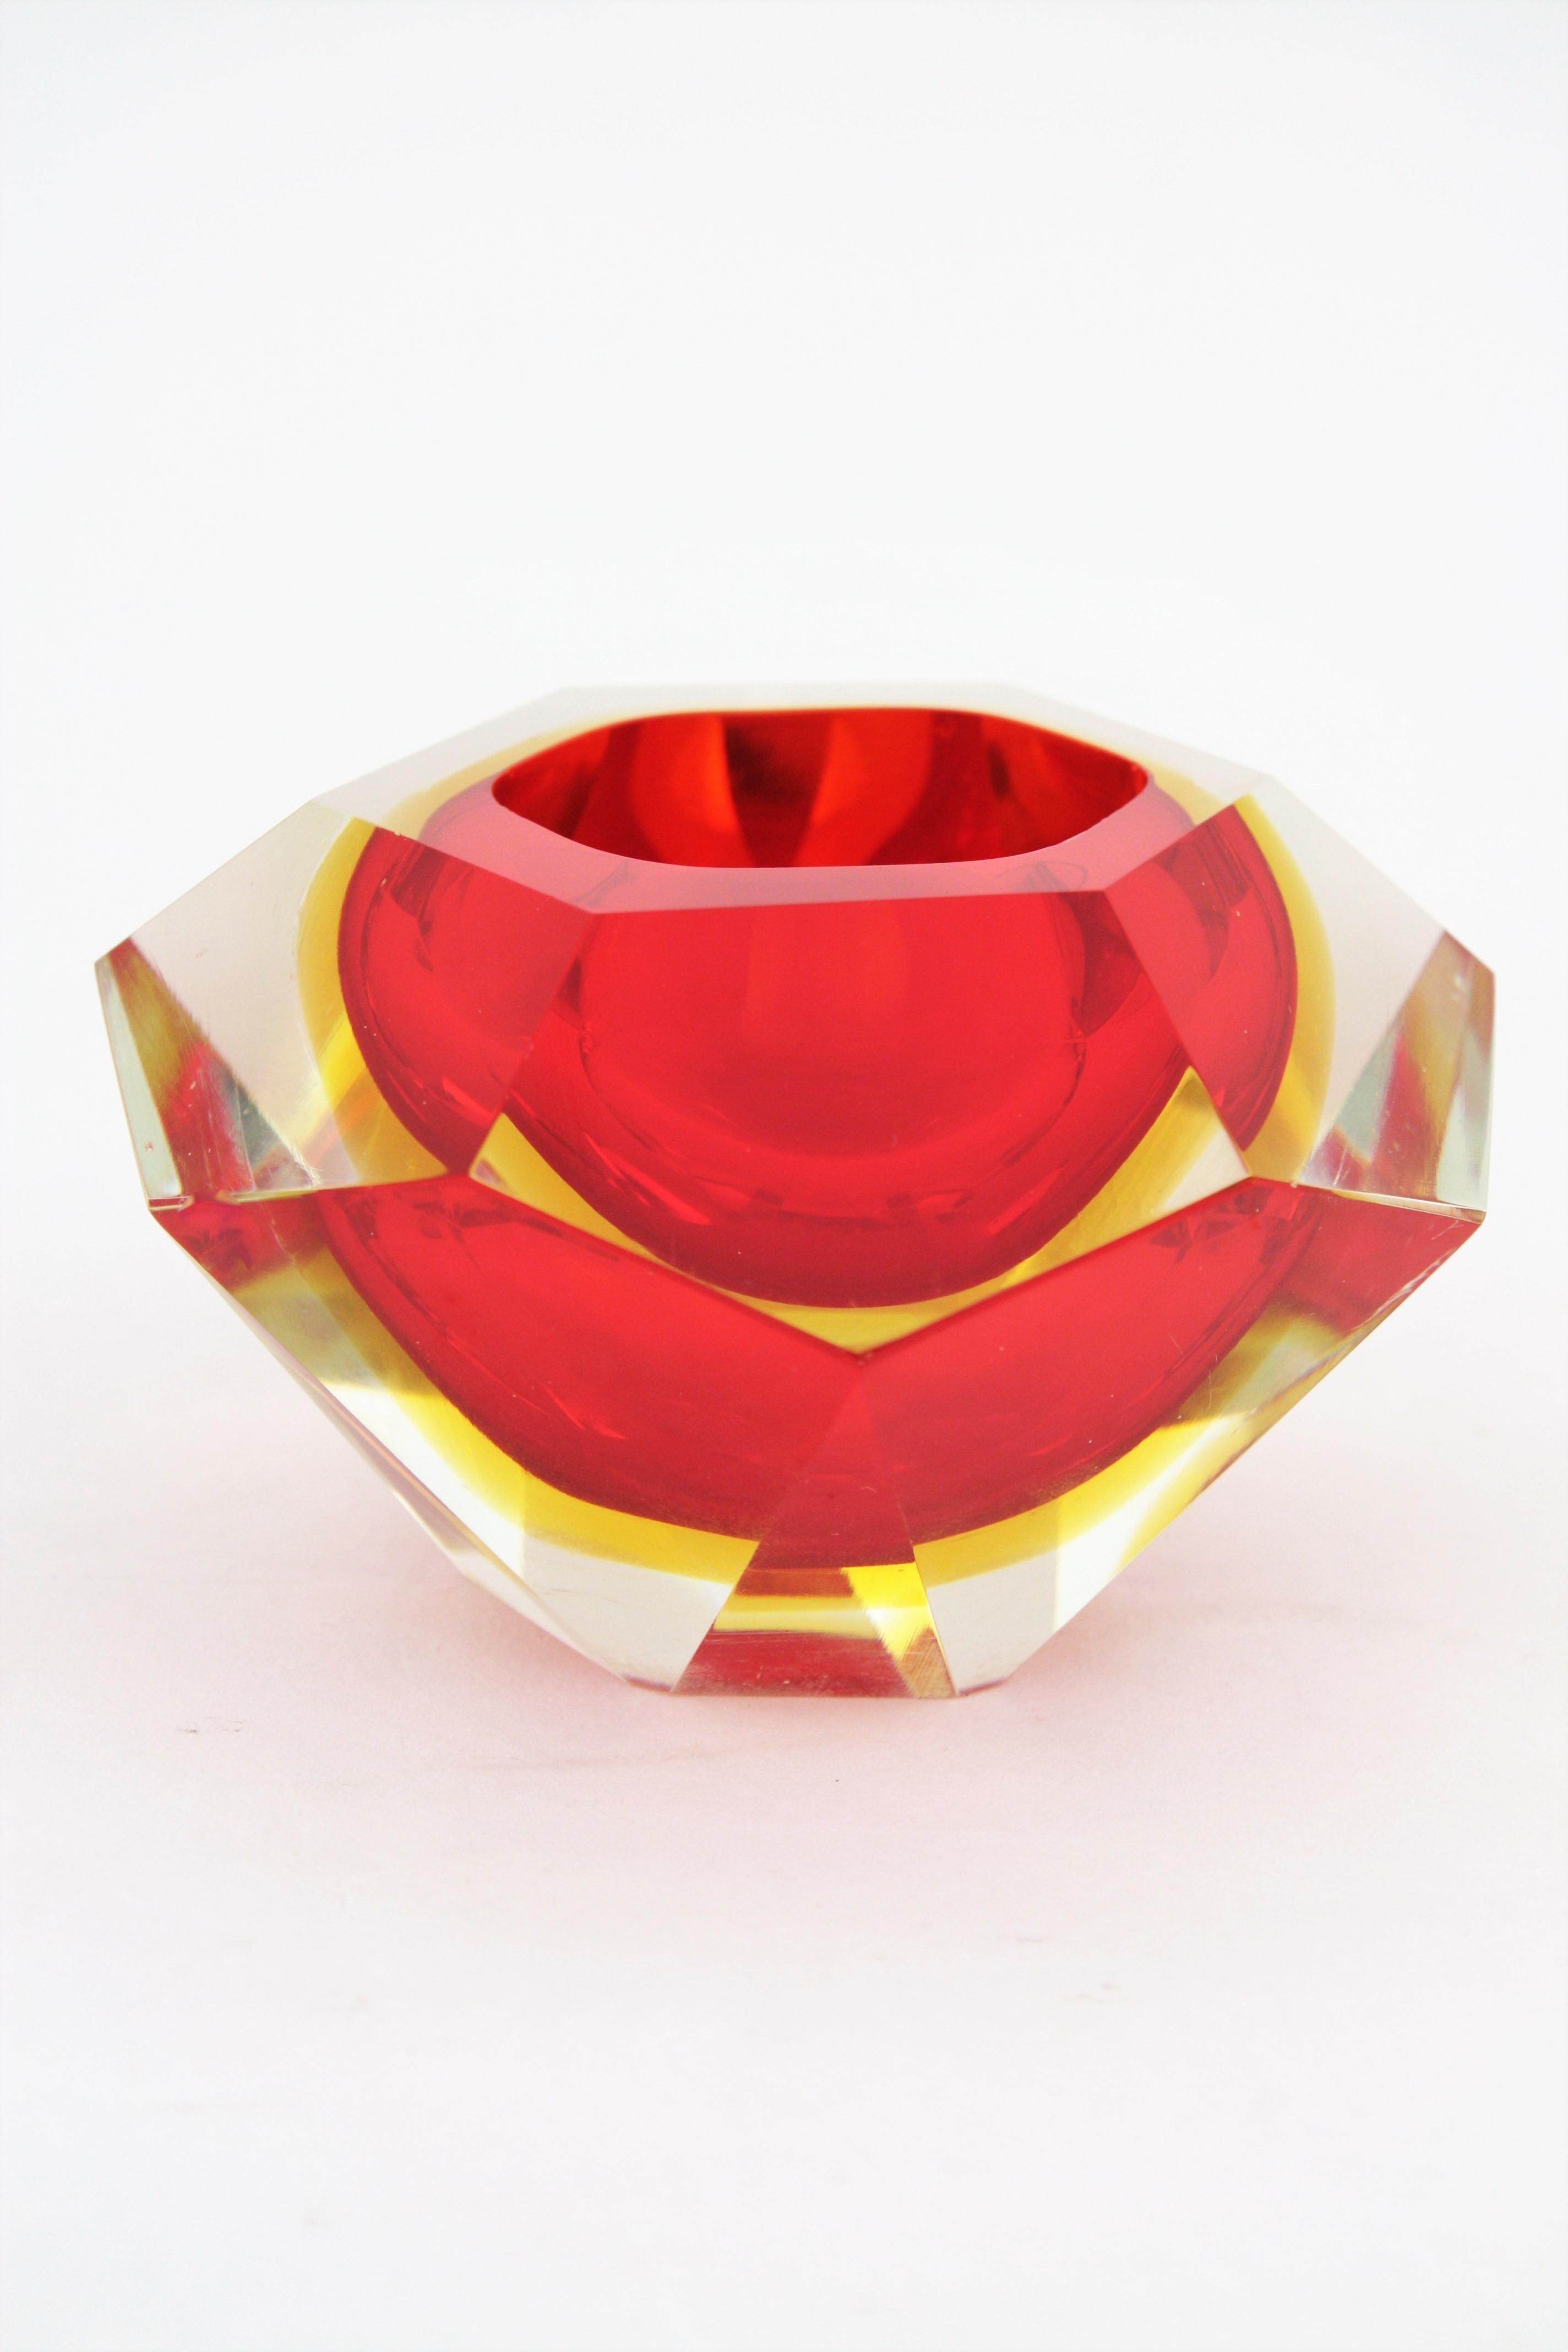 Italian Flavio Poli Murano Red, Yellow and Clear Faceted Glass Diamond Bowl or Ashtray For Sale